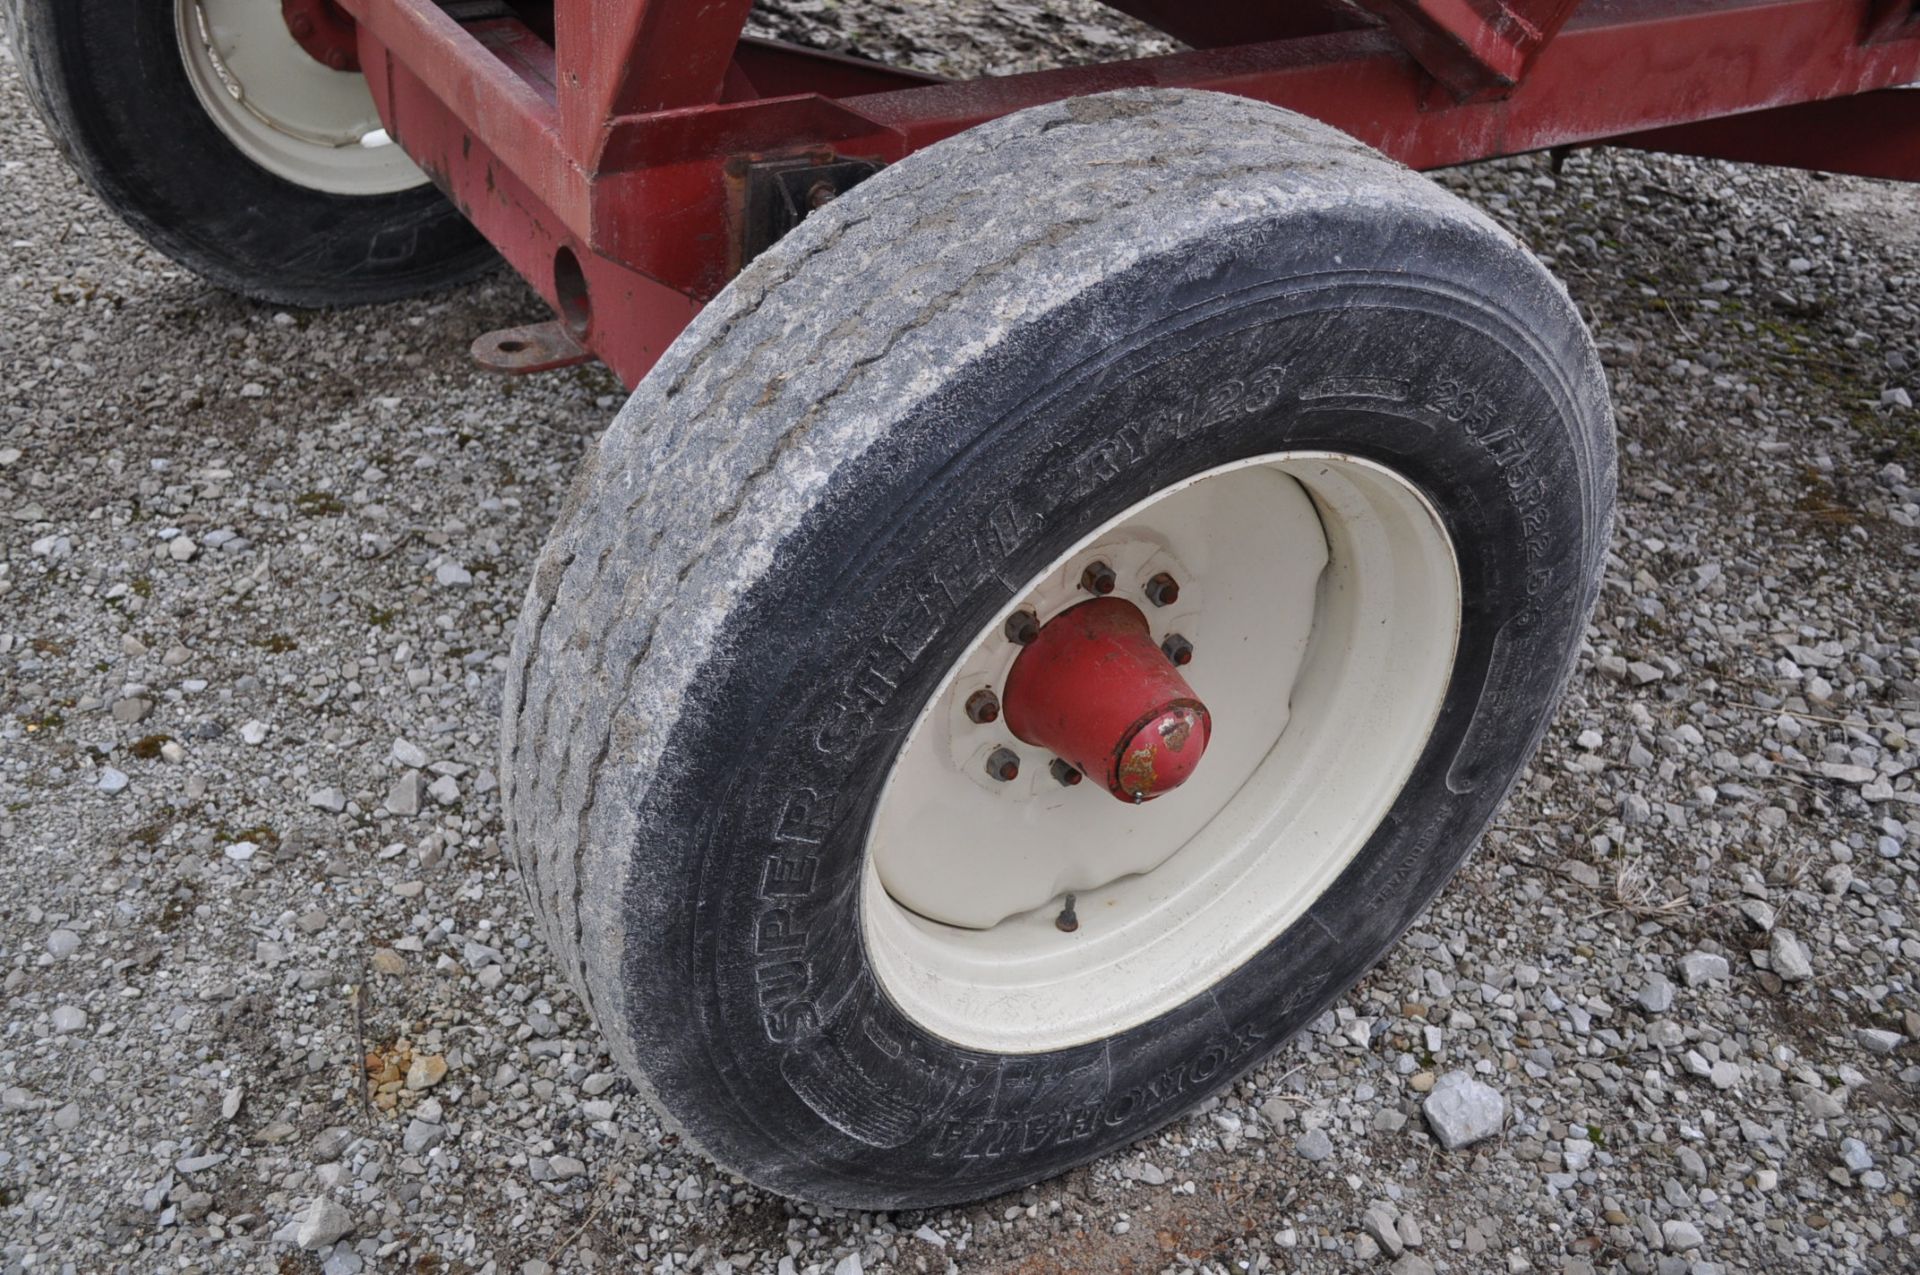 J&M 350 gravity wagon on gear, 22.5 tires - Image 8 of 9